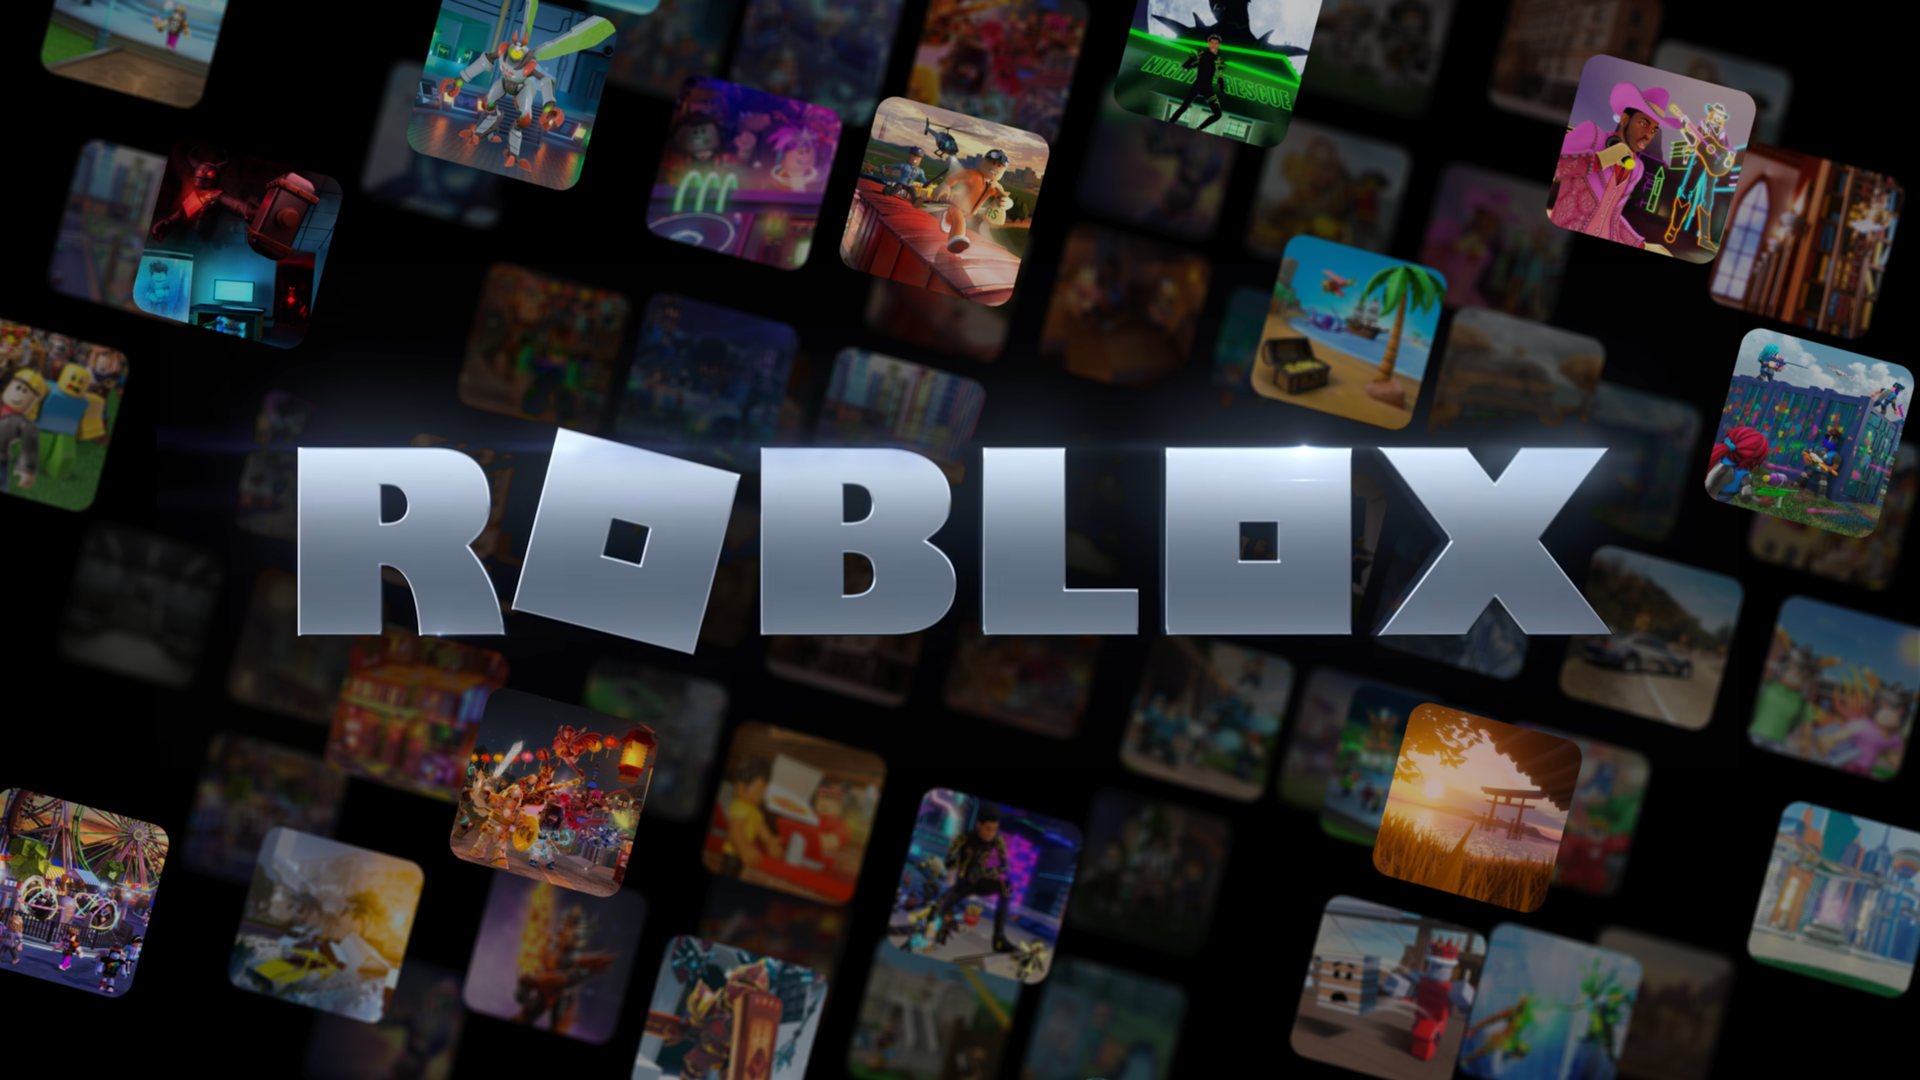 Roblox Founder Reportedly Dodged Paying Millions of Dollars in Taxes